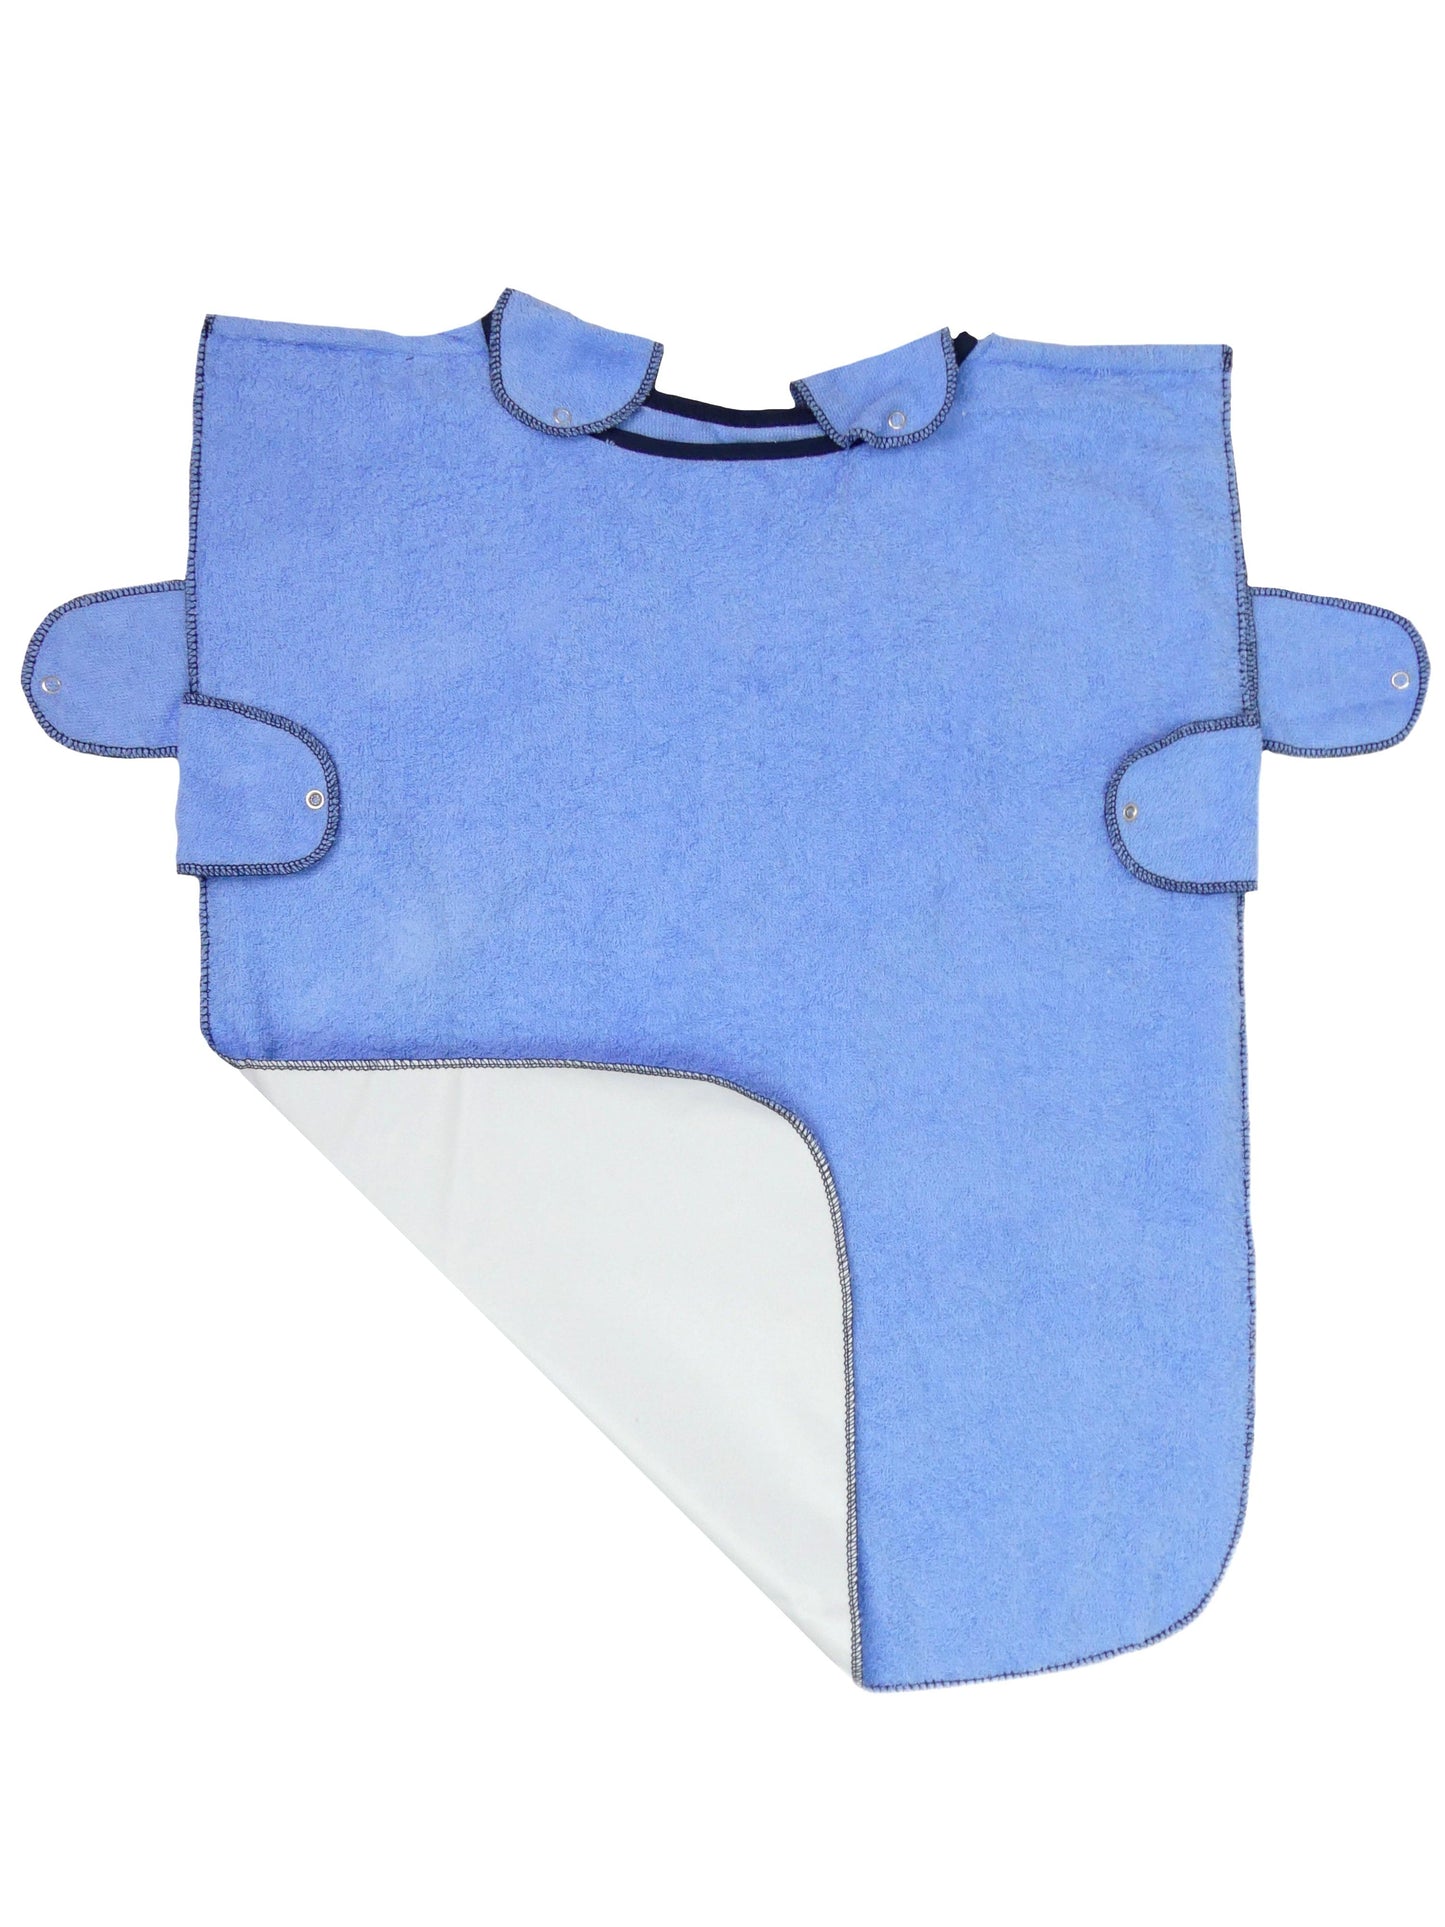 owelling feeding cape with waterproof backing fabric